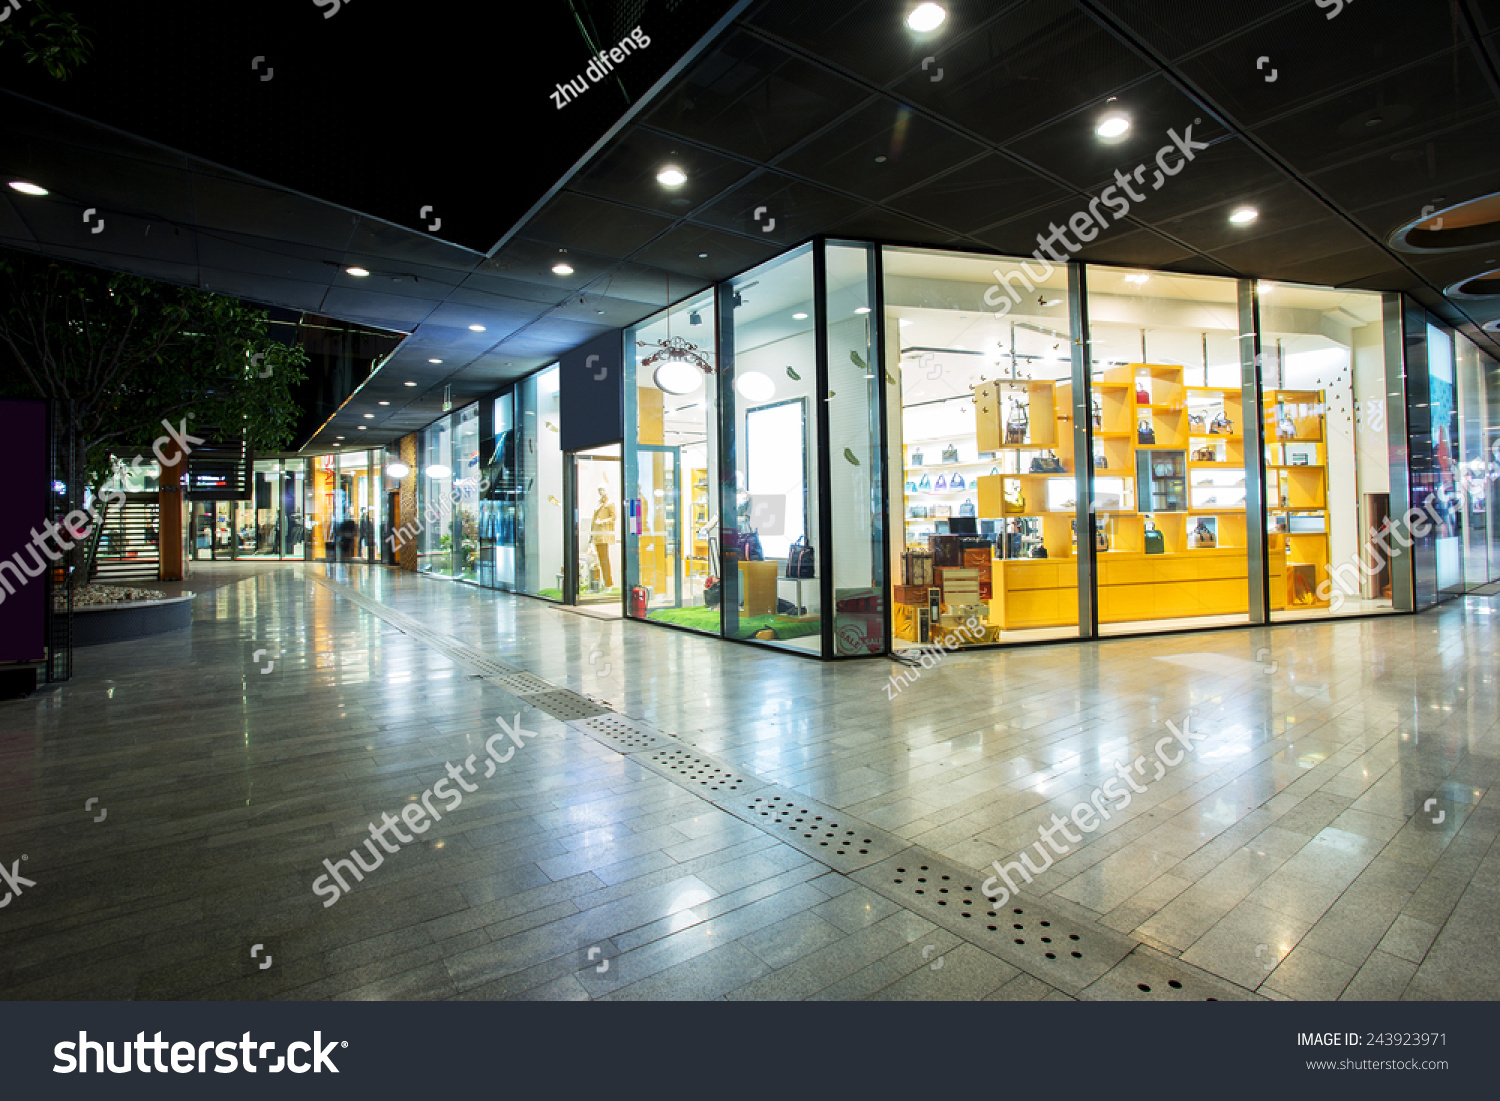 Download PowerPoint Template: store displays - storefront in shopping mall (jlkujkuoi)